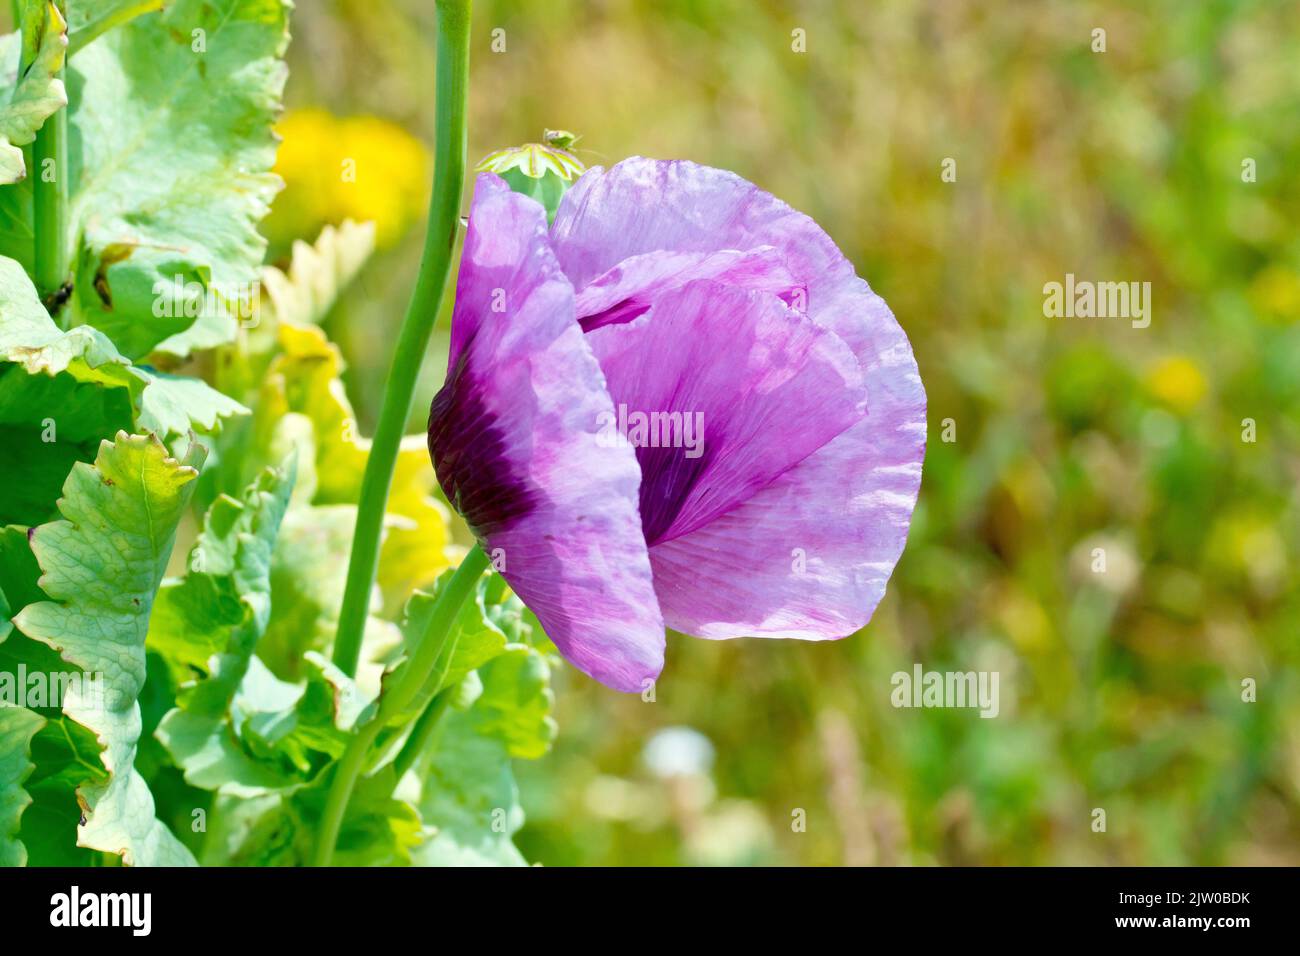 Opium Poppy (papaver somniferum), close up showing a solitary purple flower isolated from an out of focus background. Stock Photo